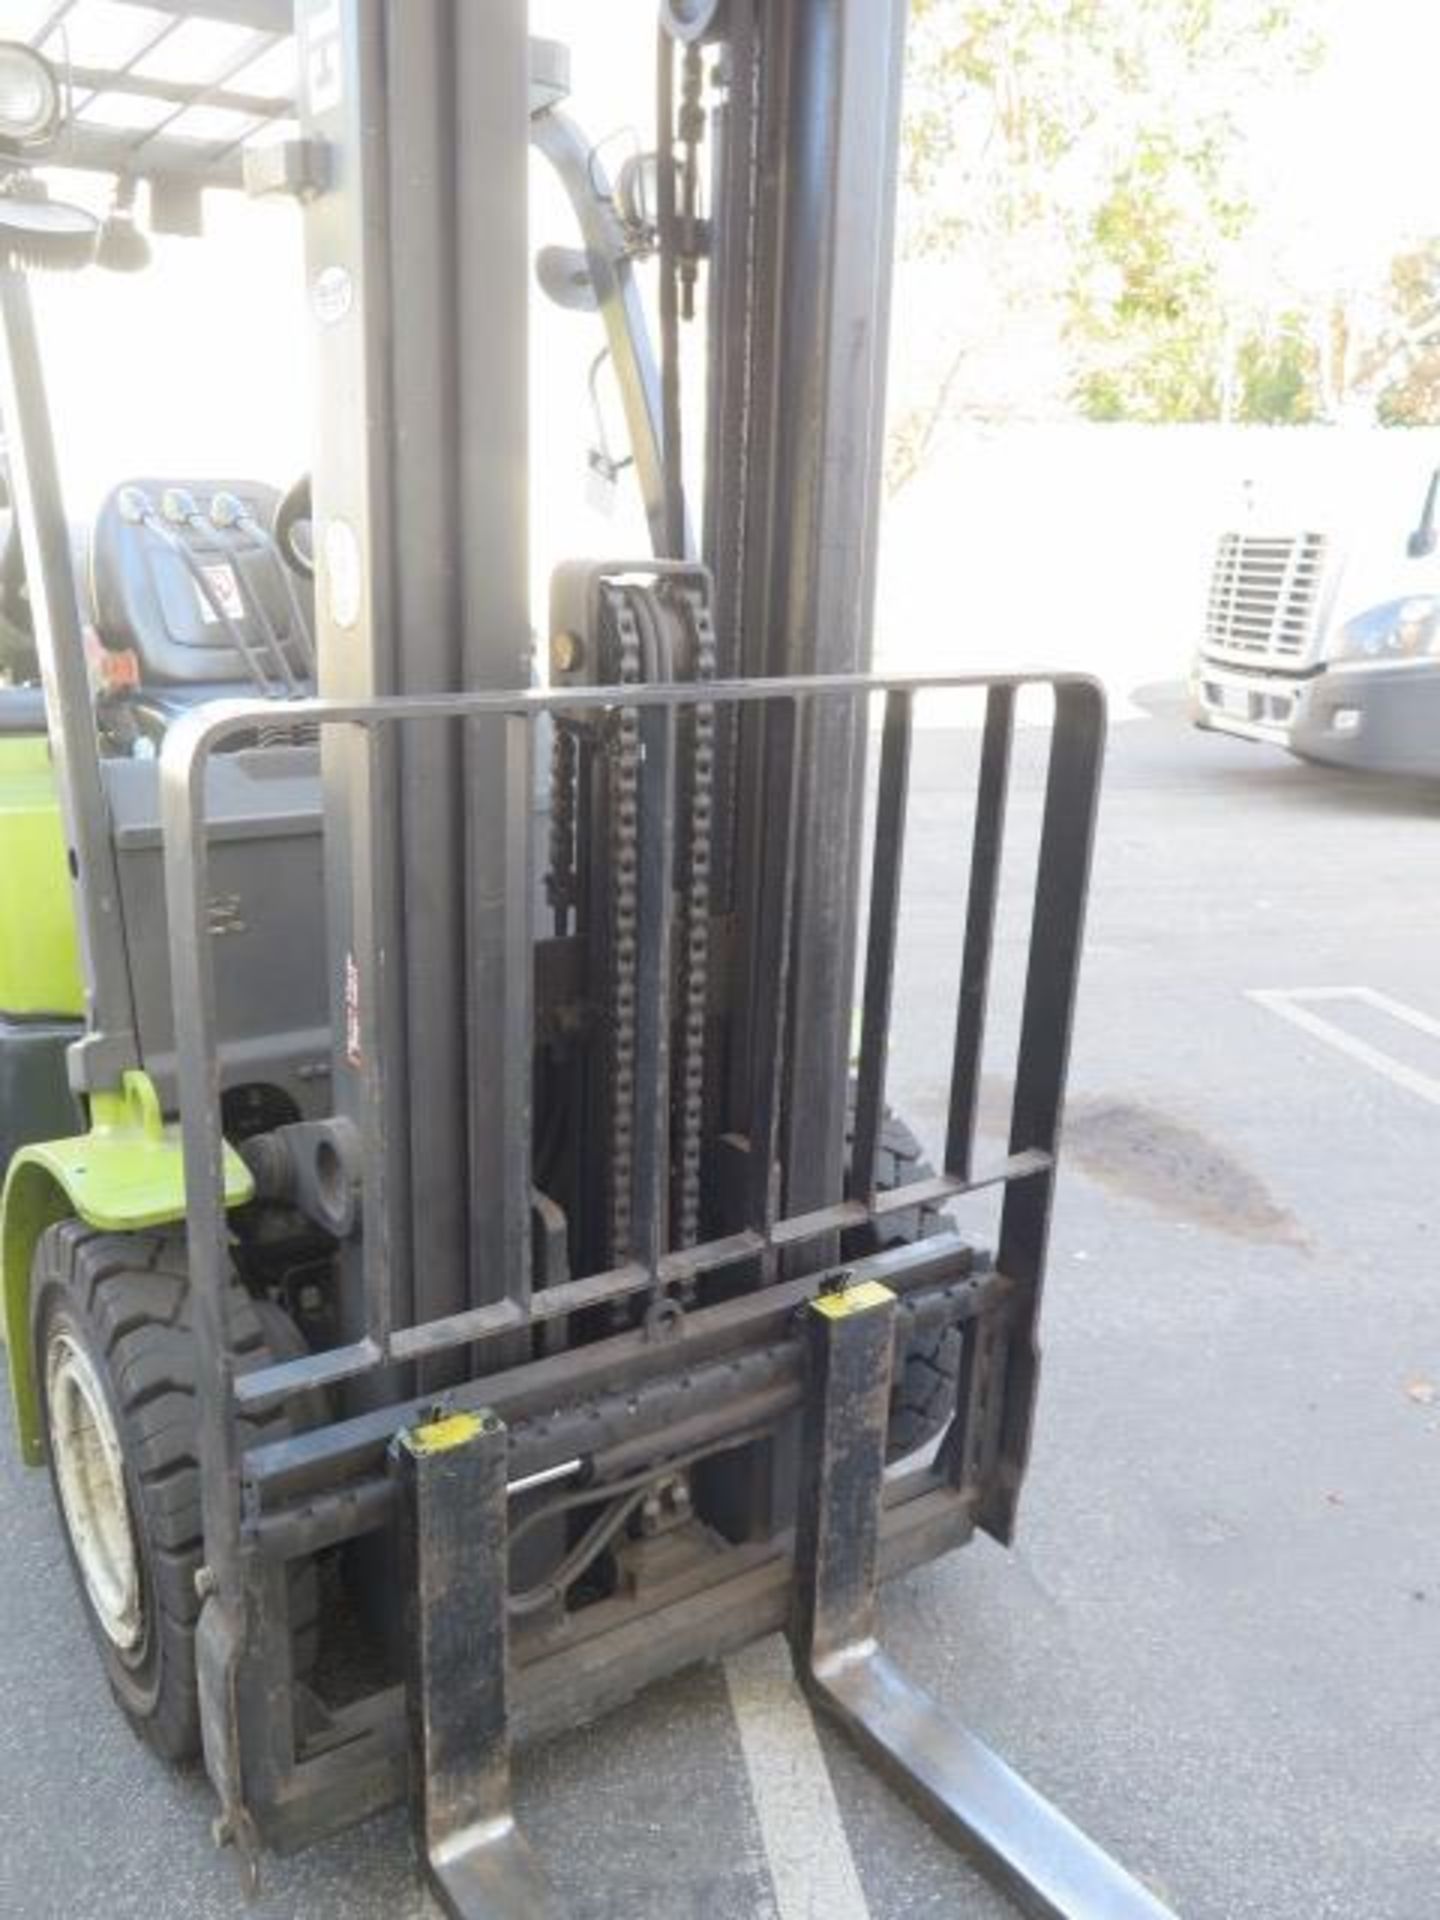 Clark C25 5000 Lb LPG Forklift s/n P-2321-0460-9862CNF w/ 3-Stage, 189" Lift, Side Shift, SOLD AS IS - Image 5 of 18